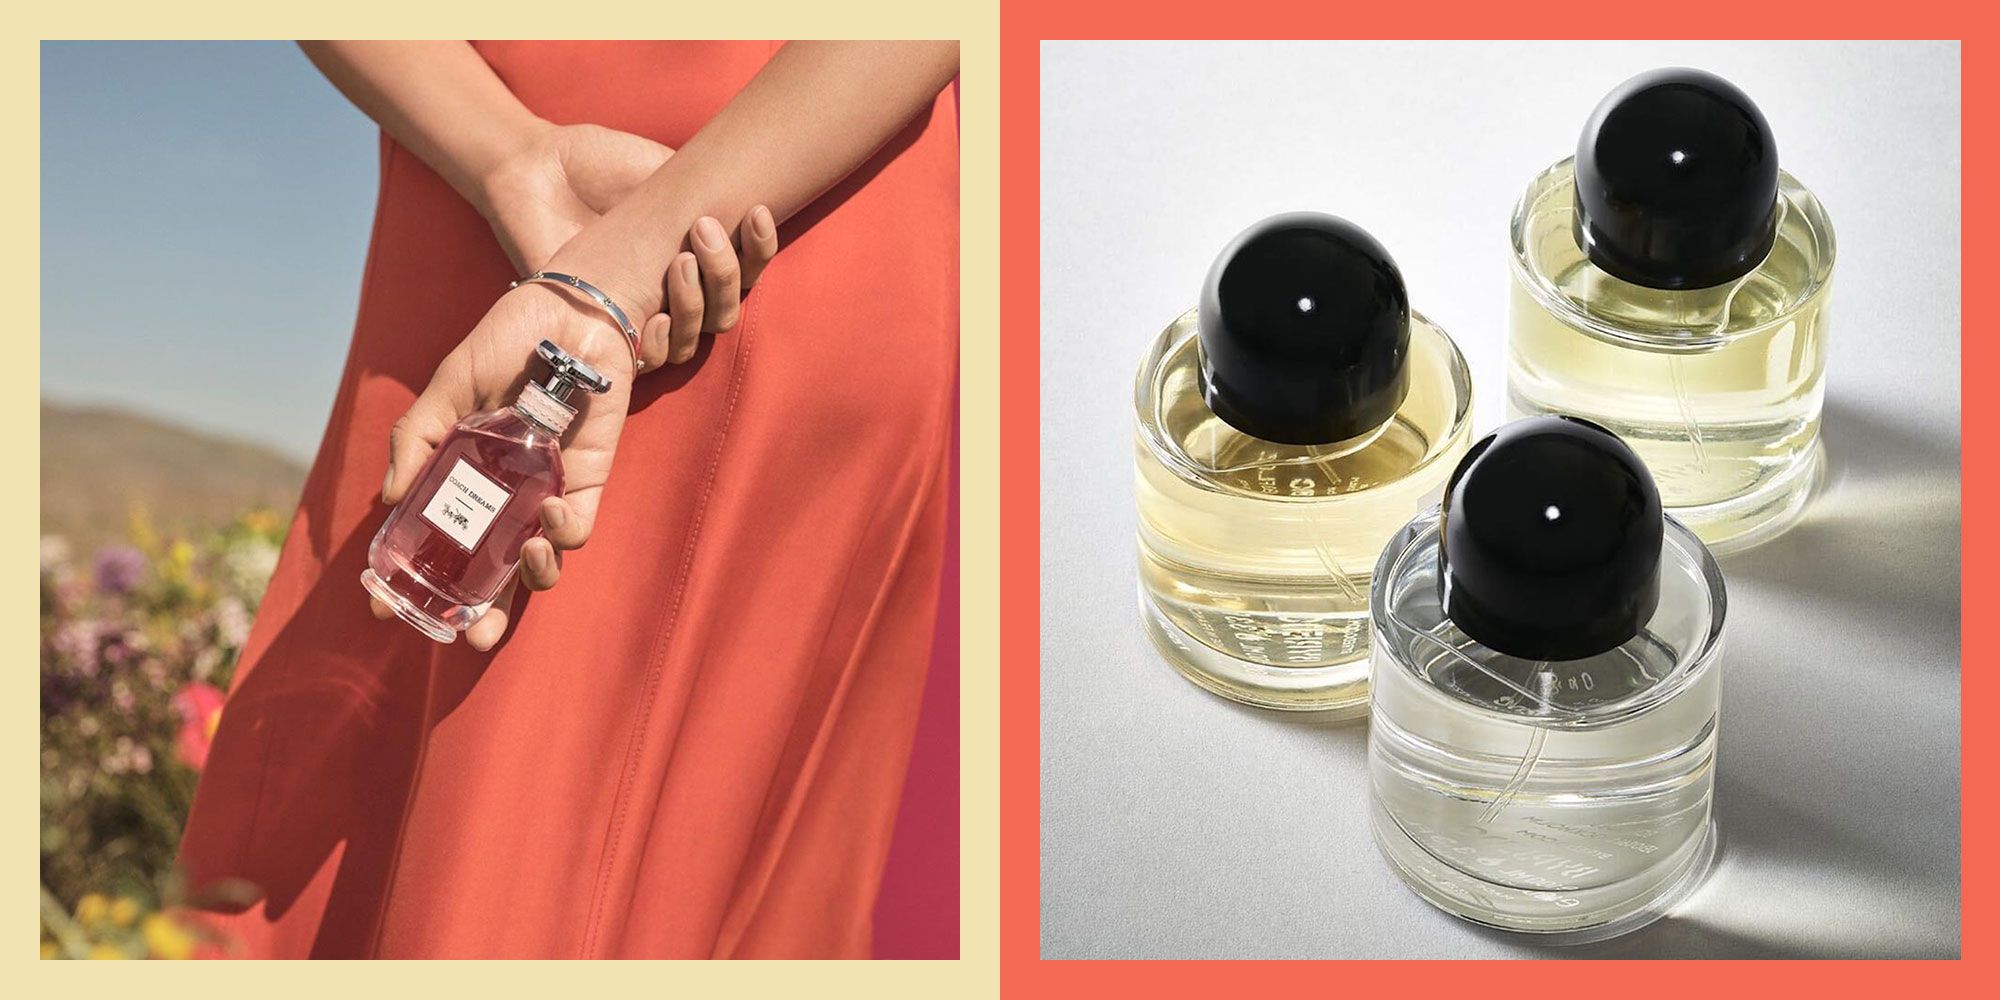 The Fragrance You Should Wear Based On Your Zodiac Sign